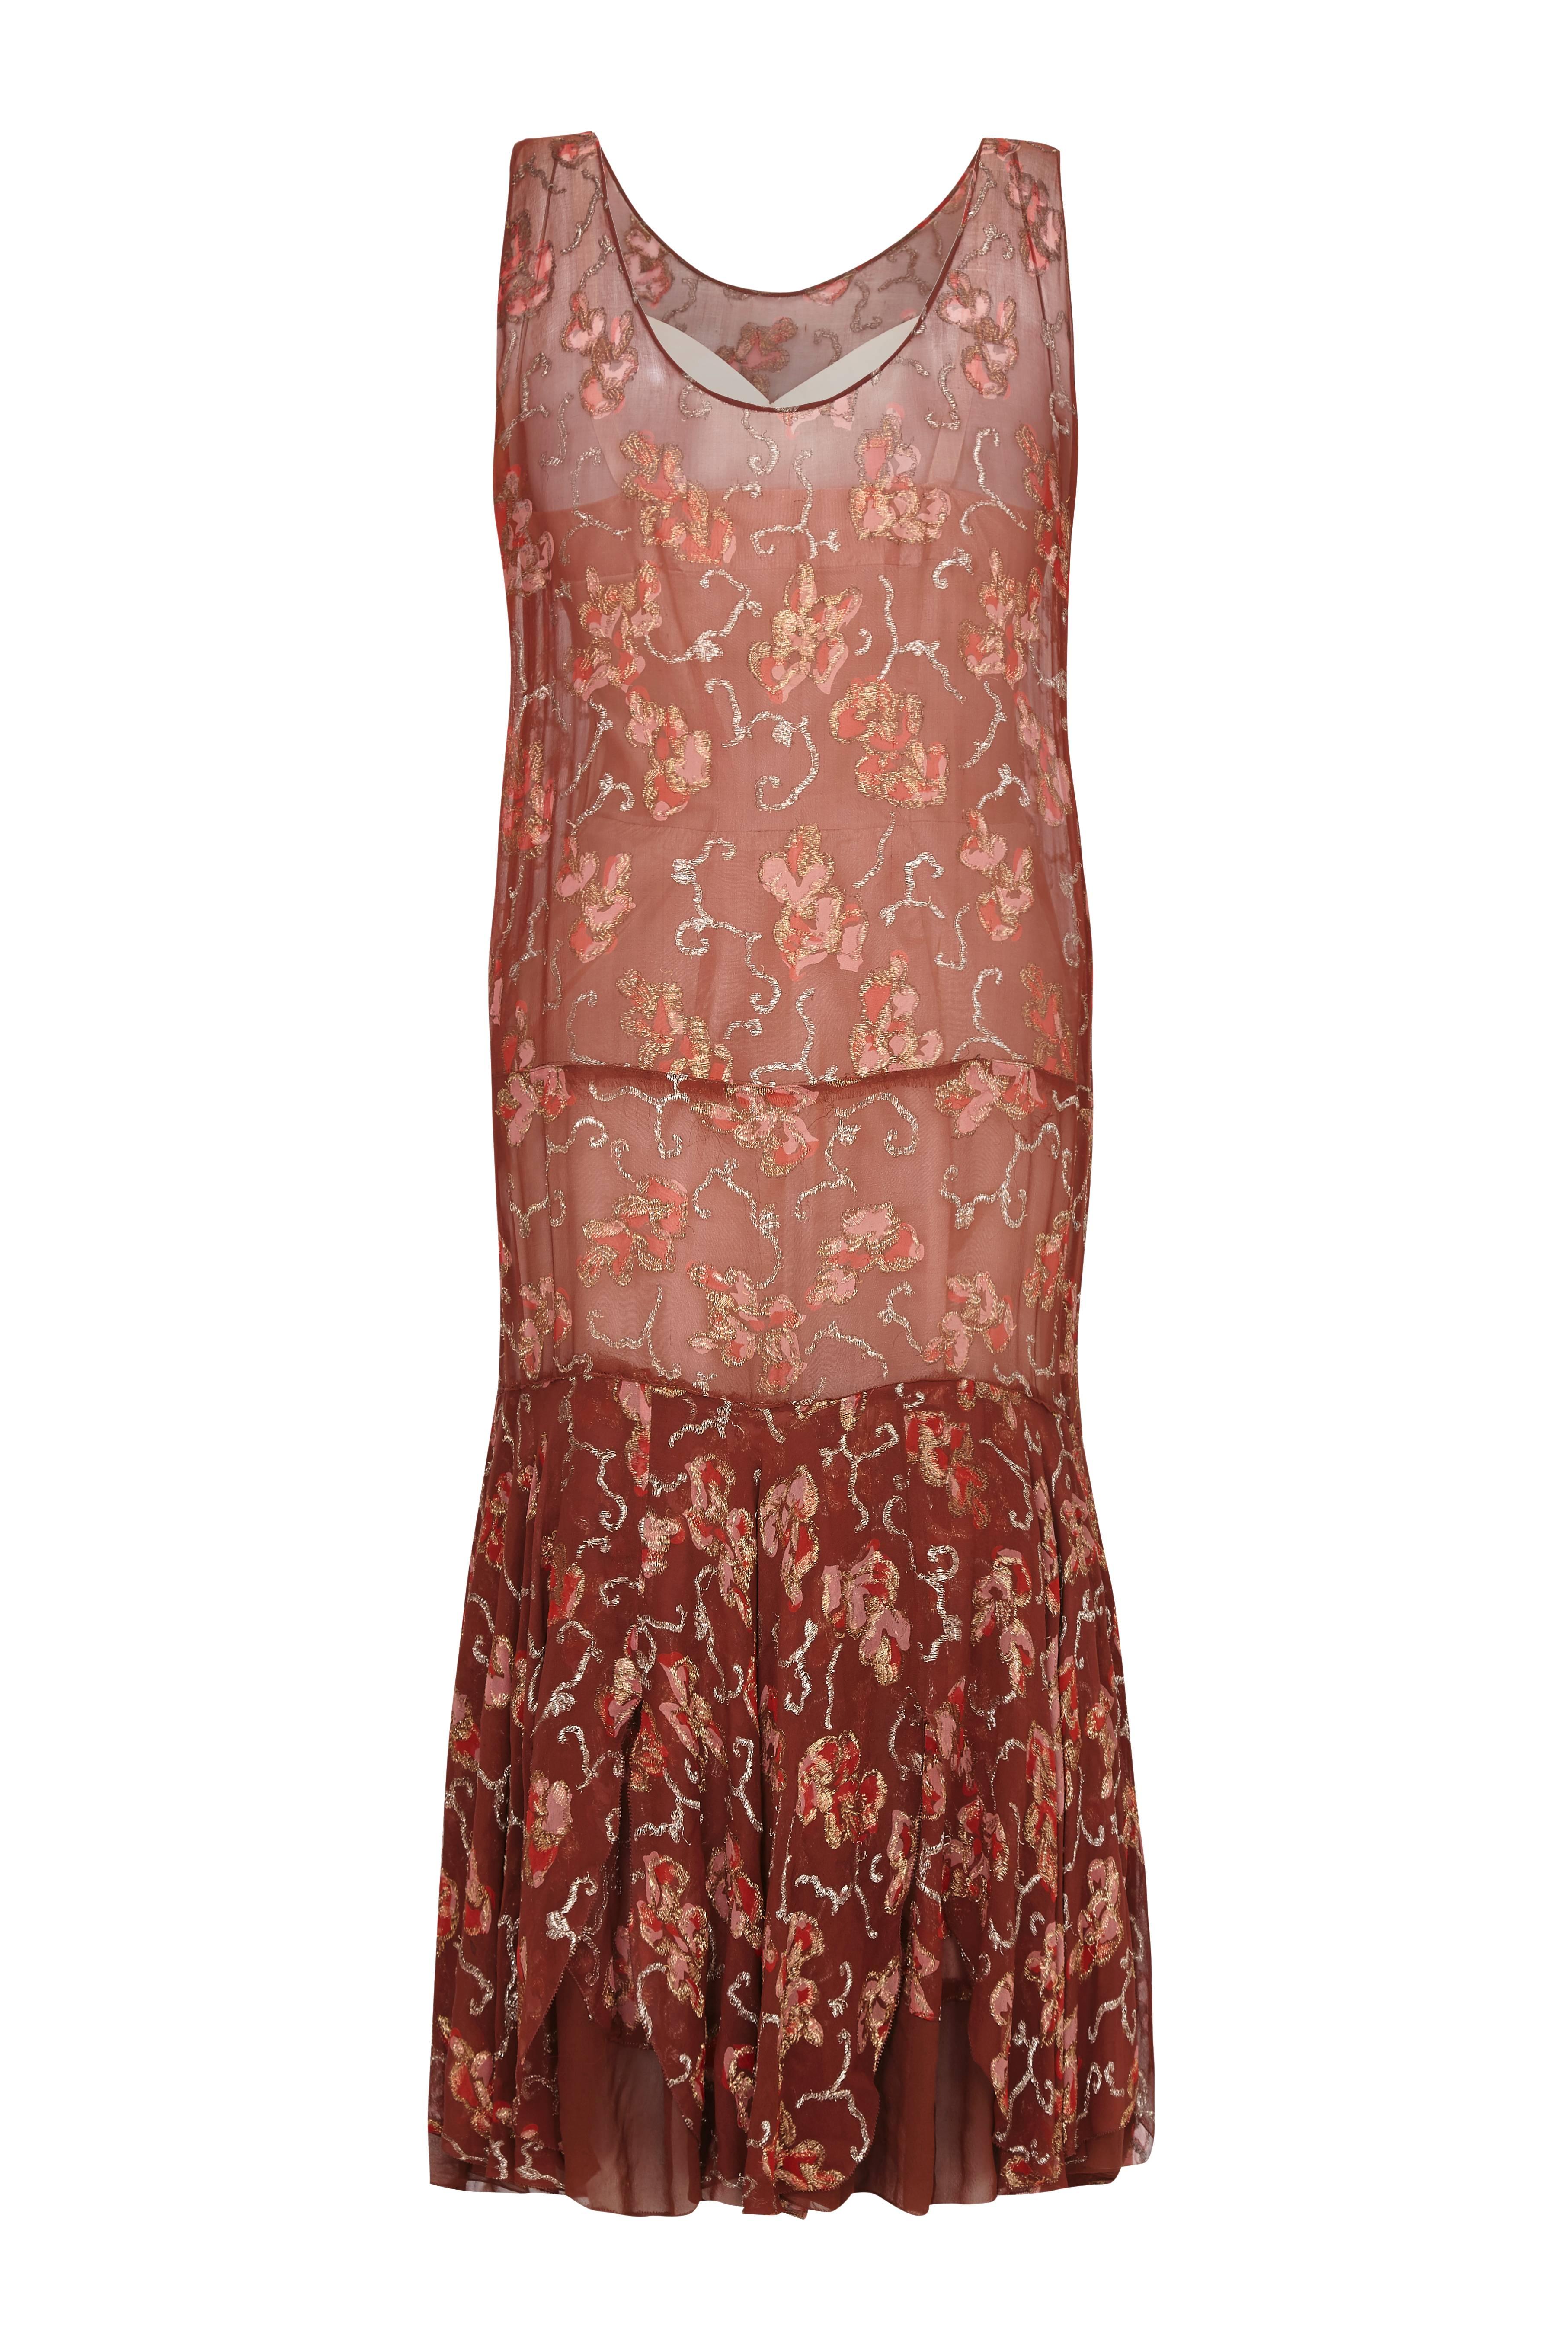 Beautiful 1920s vintage flapper dress with pretty pink petal print and gold thread embroidery.  This silk chiffon dress features the  classic dropped waist and has pin tucking detail to the front.  Due to the loose fitting flapper style it could